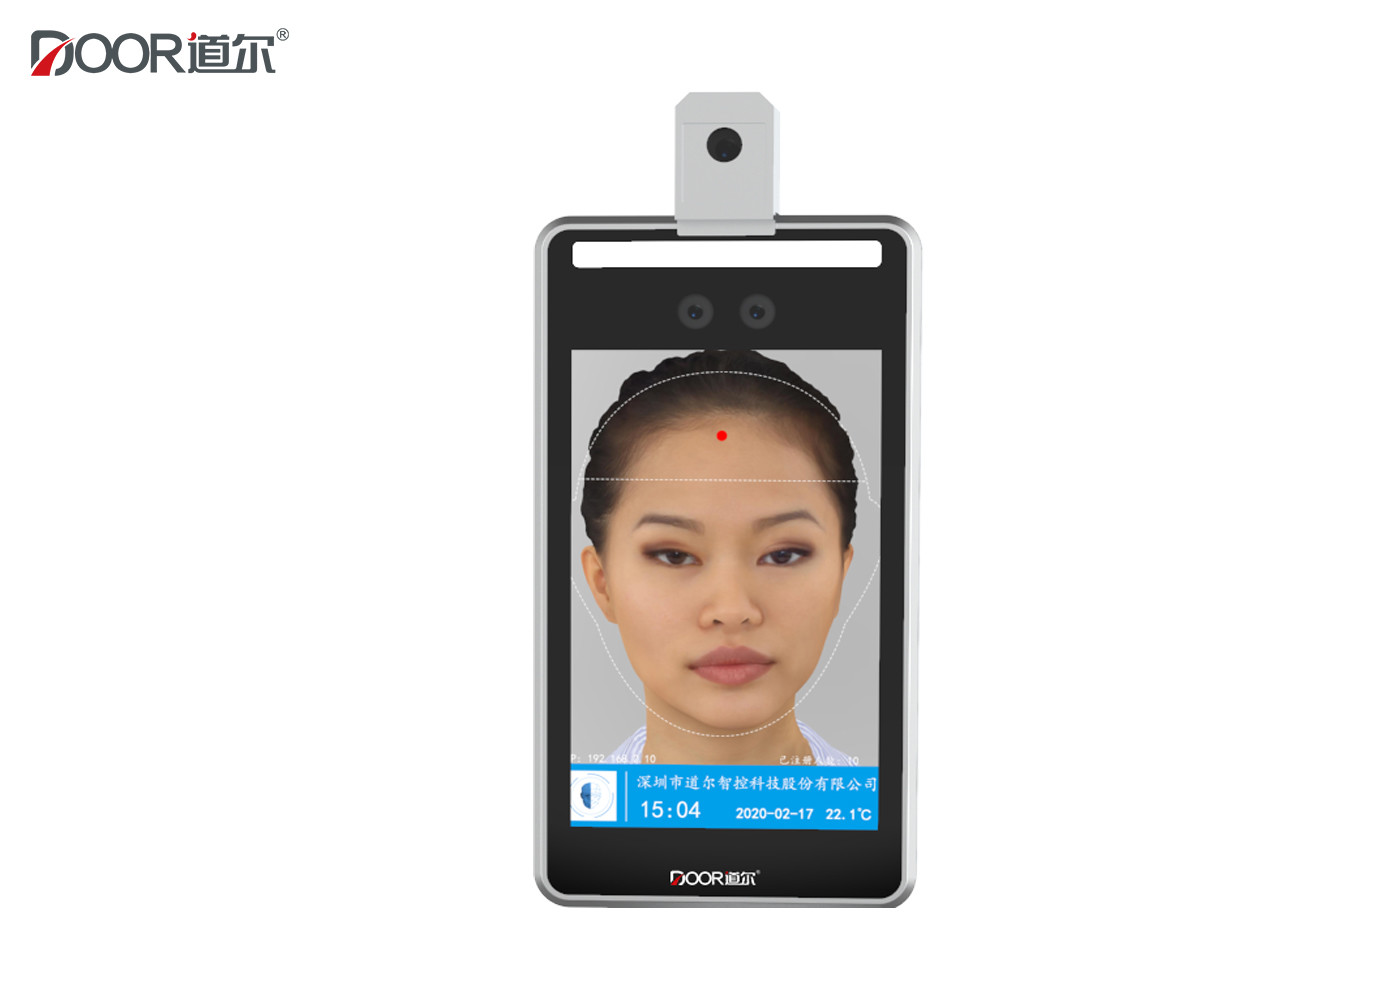 8 Inch Screen Face Recognition Access Control System With Fever Detecting